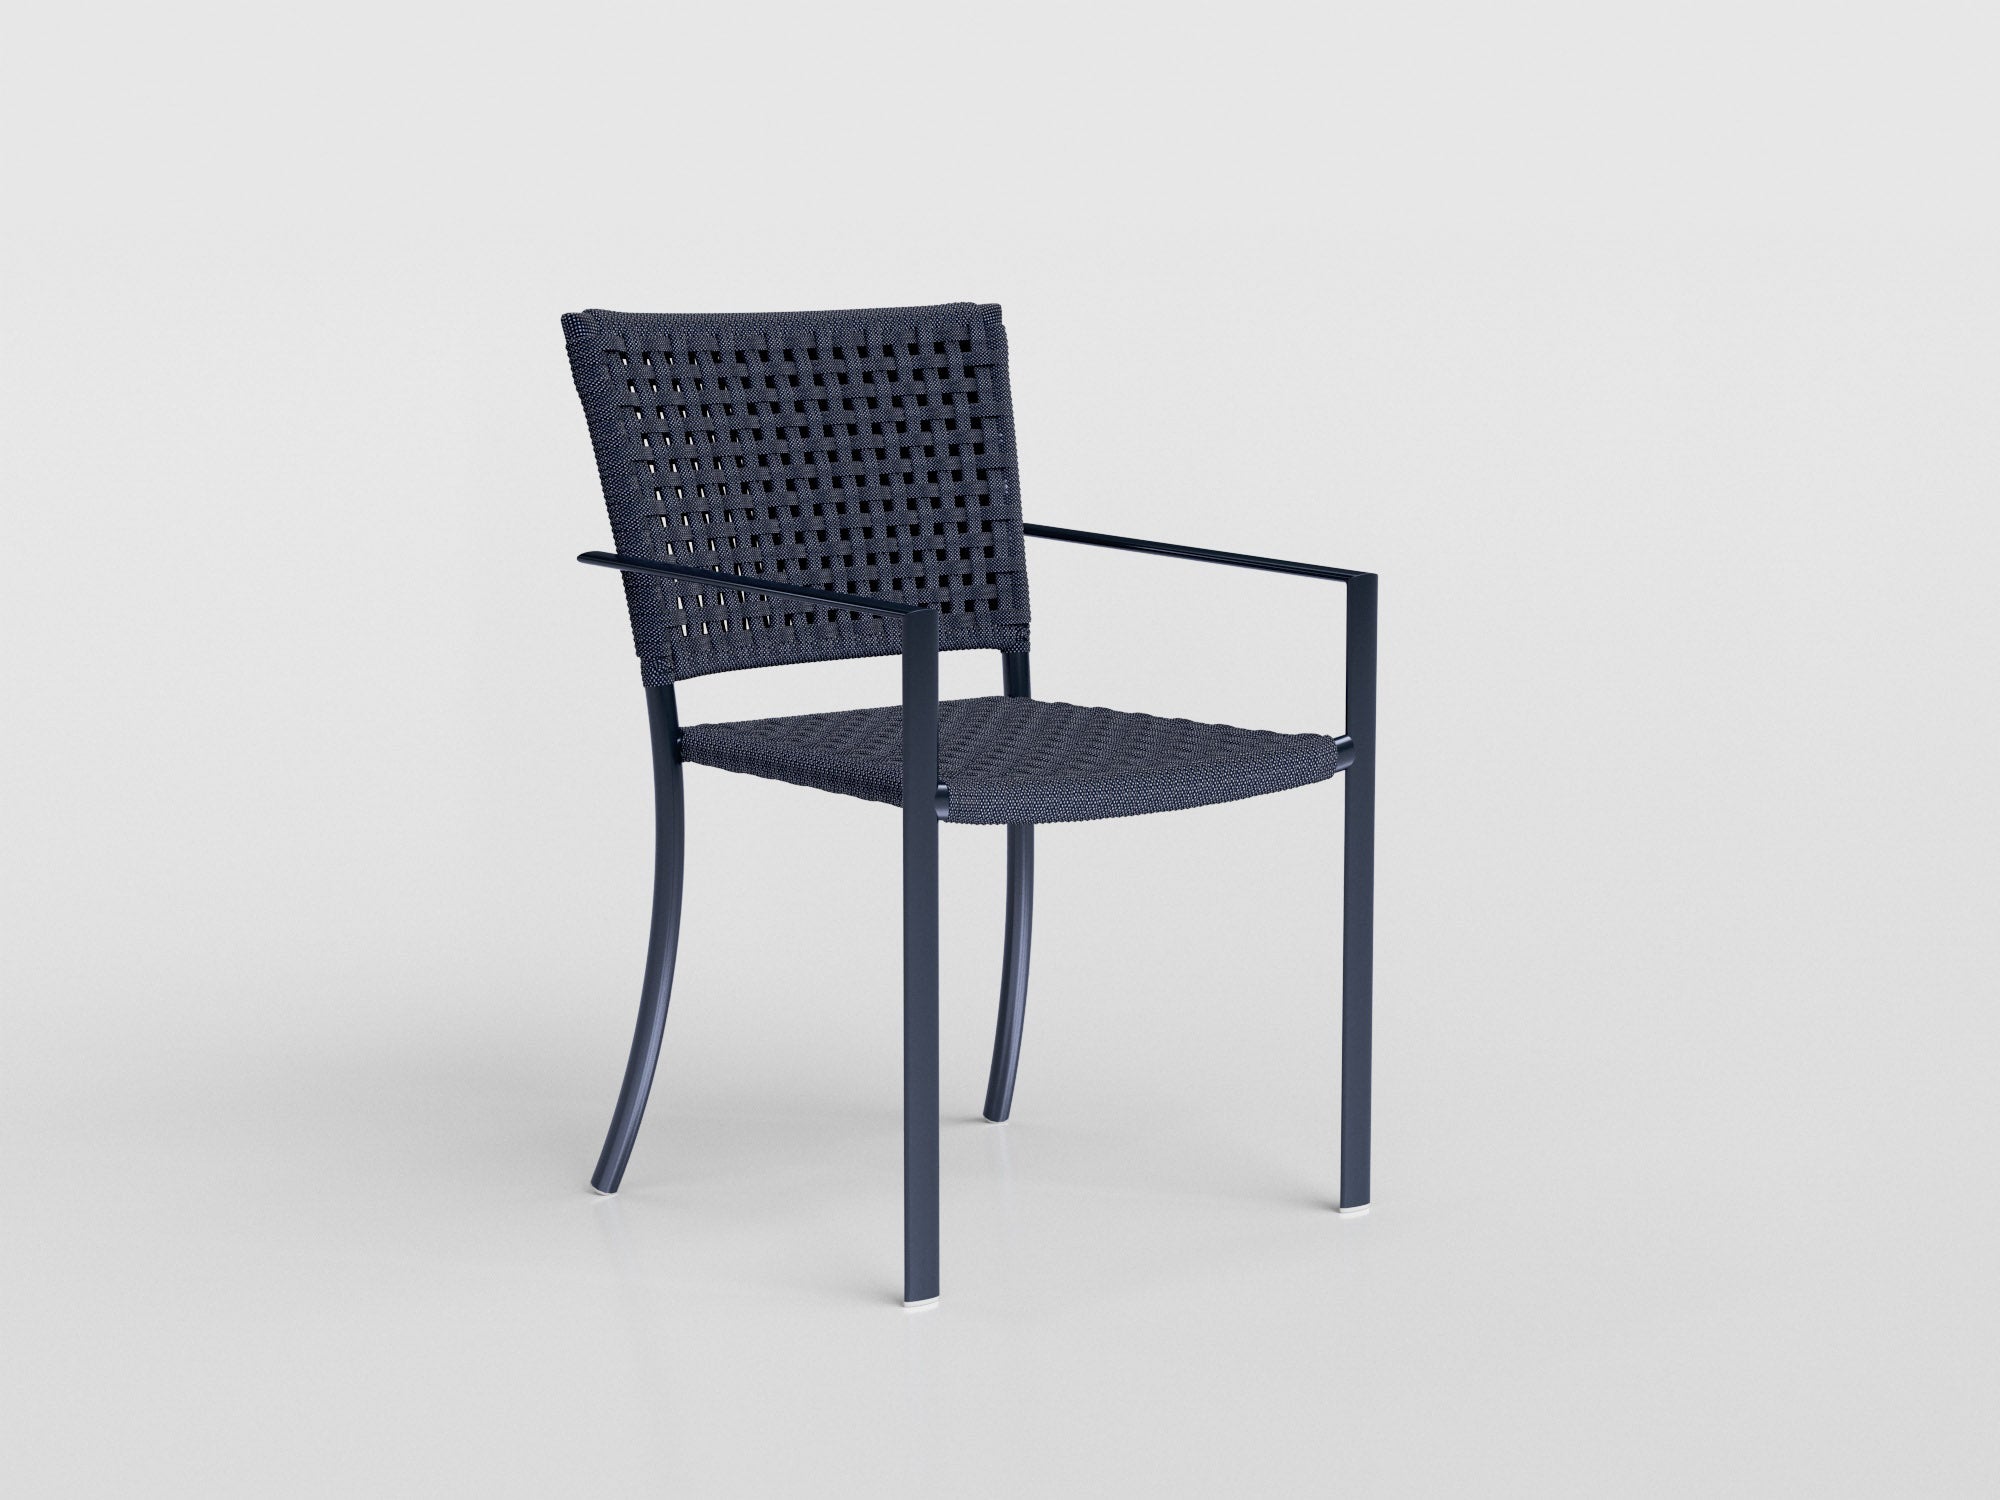 Giardino Armchair made of aluminium with braided nautical rope seat and back, designed by Luciano Mandelli